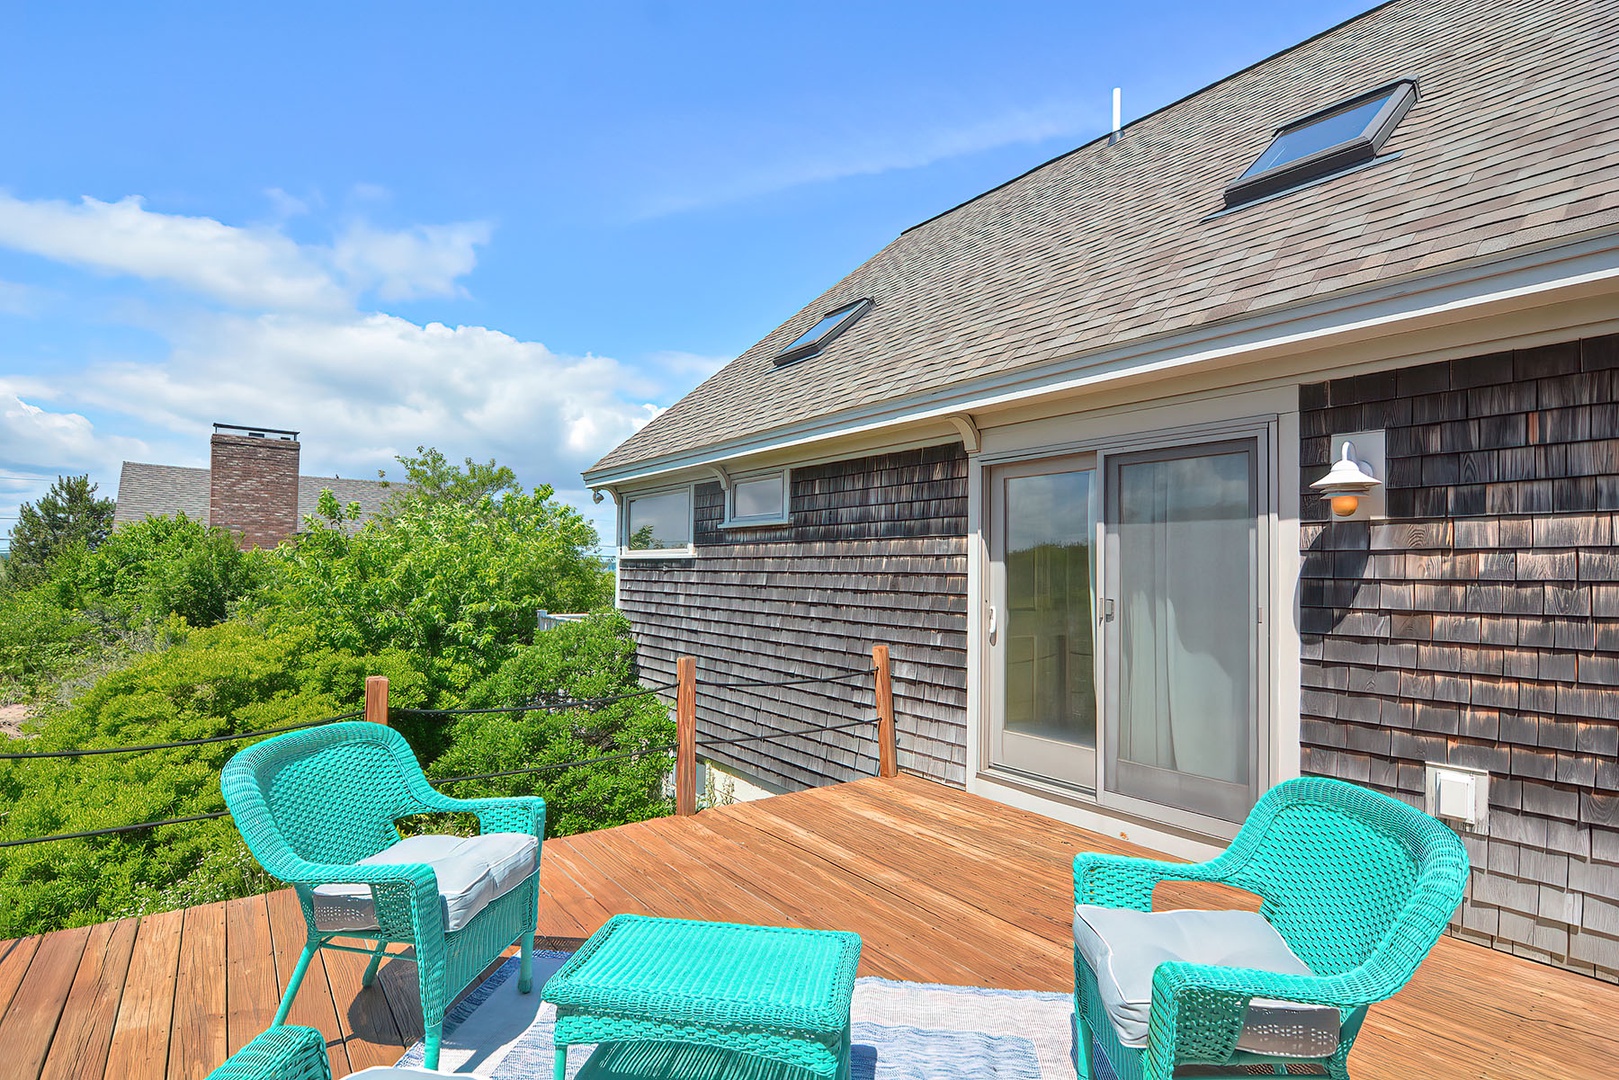 Enjoy the salty air and sunshine on the deck.